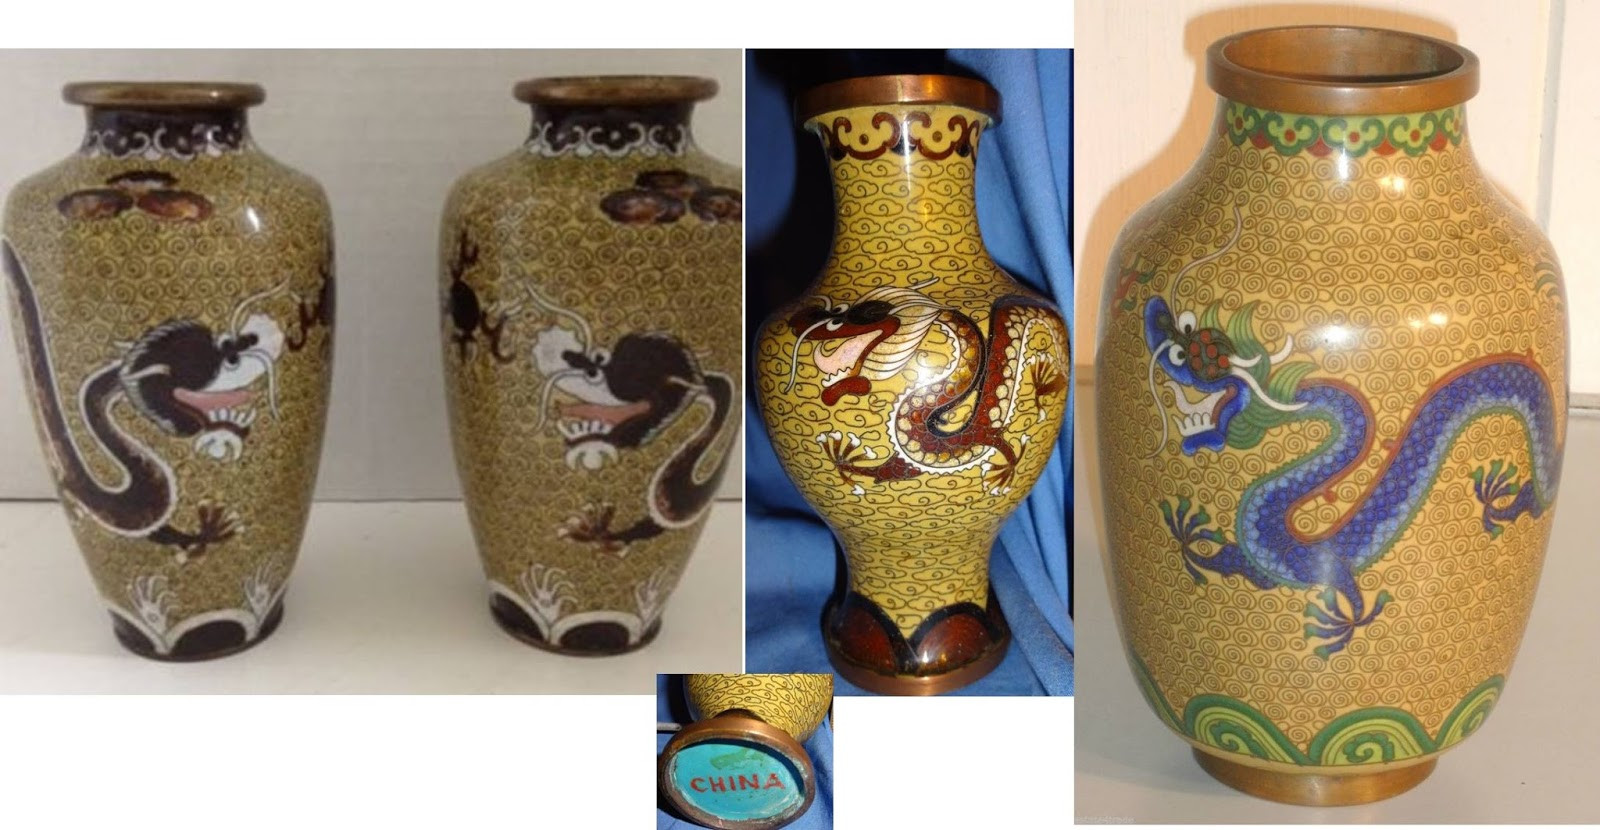 10 Wonderful Vintage Japanese Cloisonne Vase 2024 free download vintage japanese cloisonne vase of beadiste november 2015 regarding these vases seem likely to date from around the 1930s 40s the china mark on the center vase only indicates the vase was pr